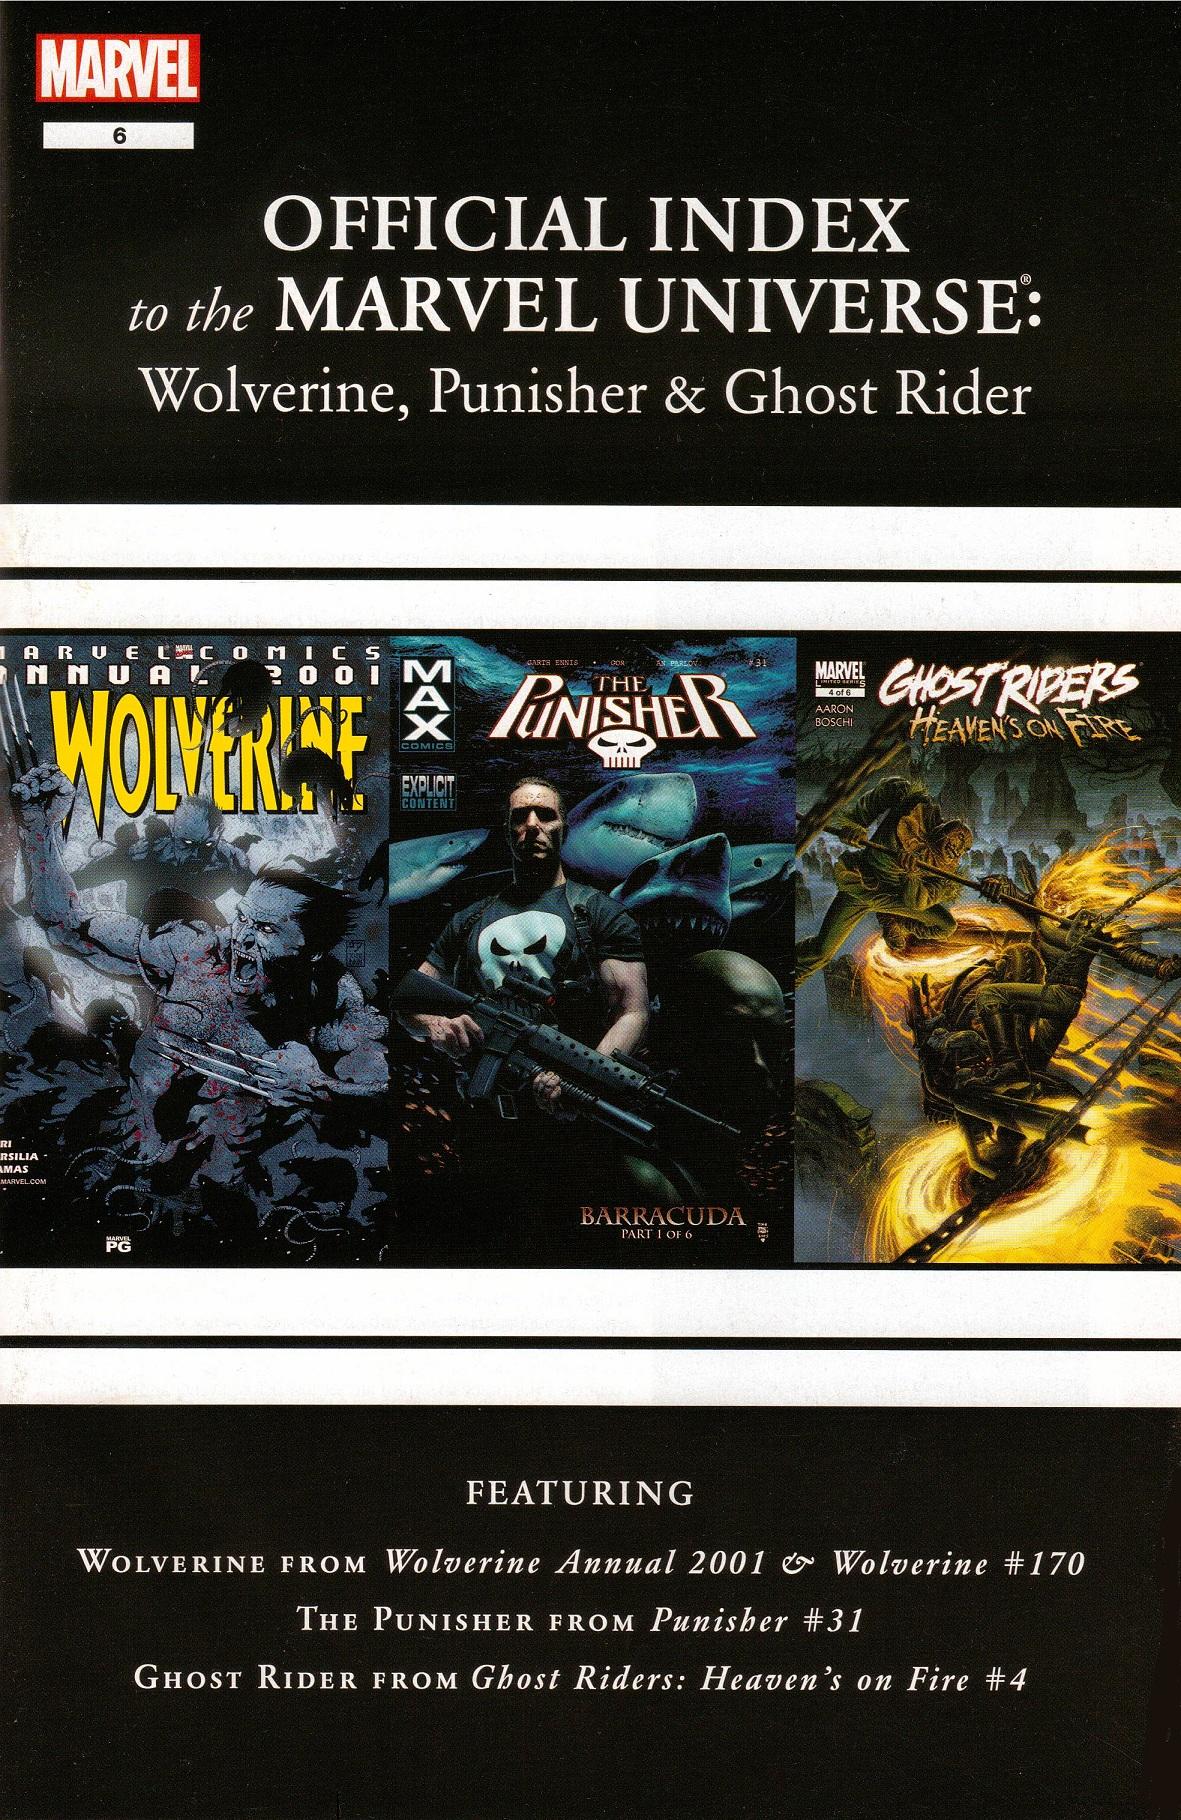 Wolverine, Punisher & Ghost Rider: Official Index to the Marvel Universe Vol. 1 #6